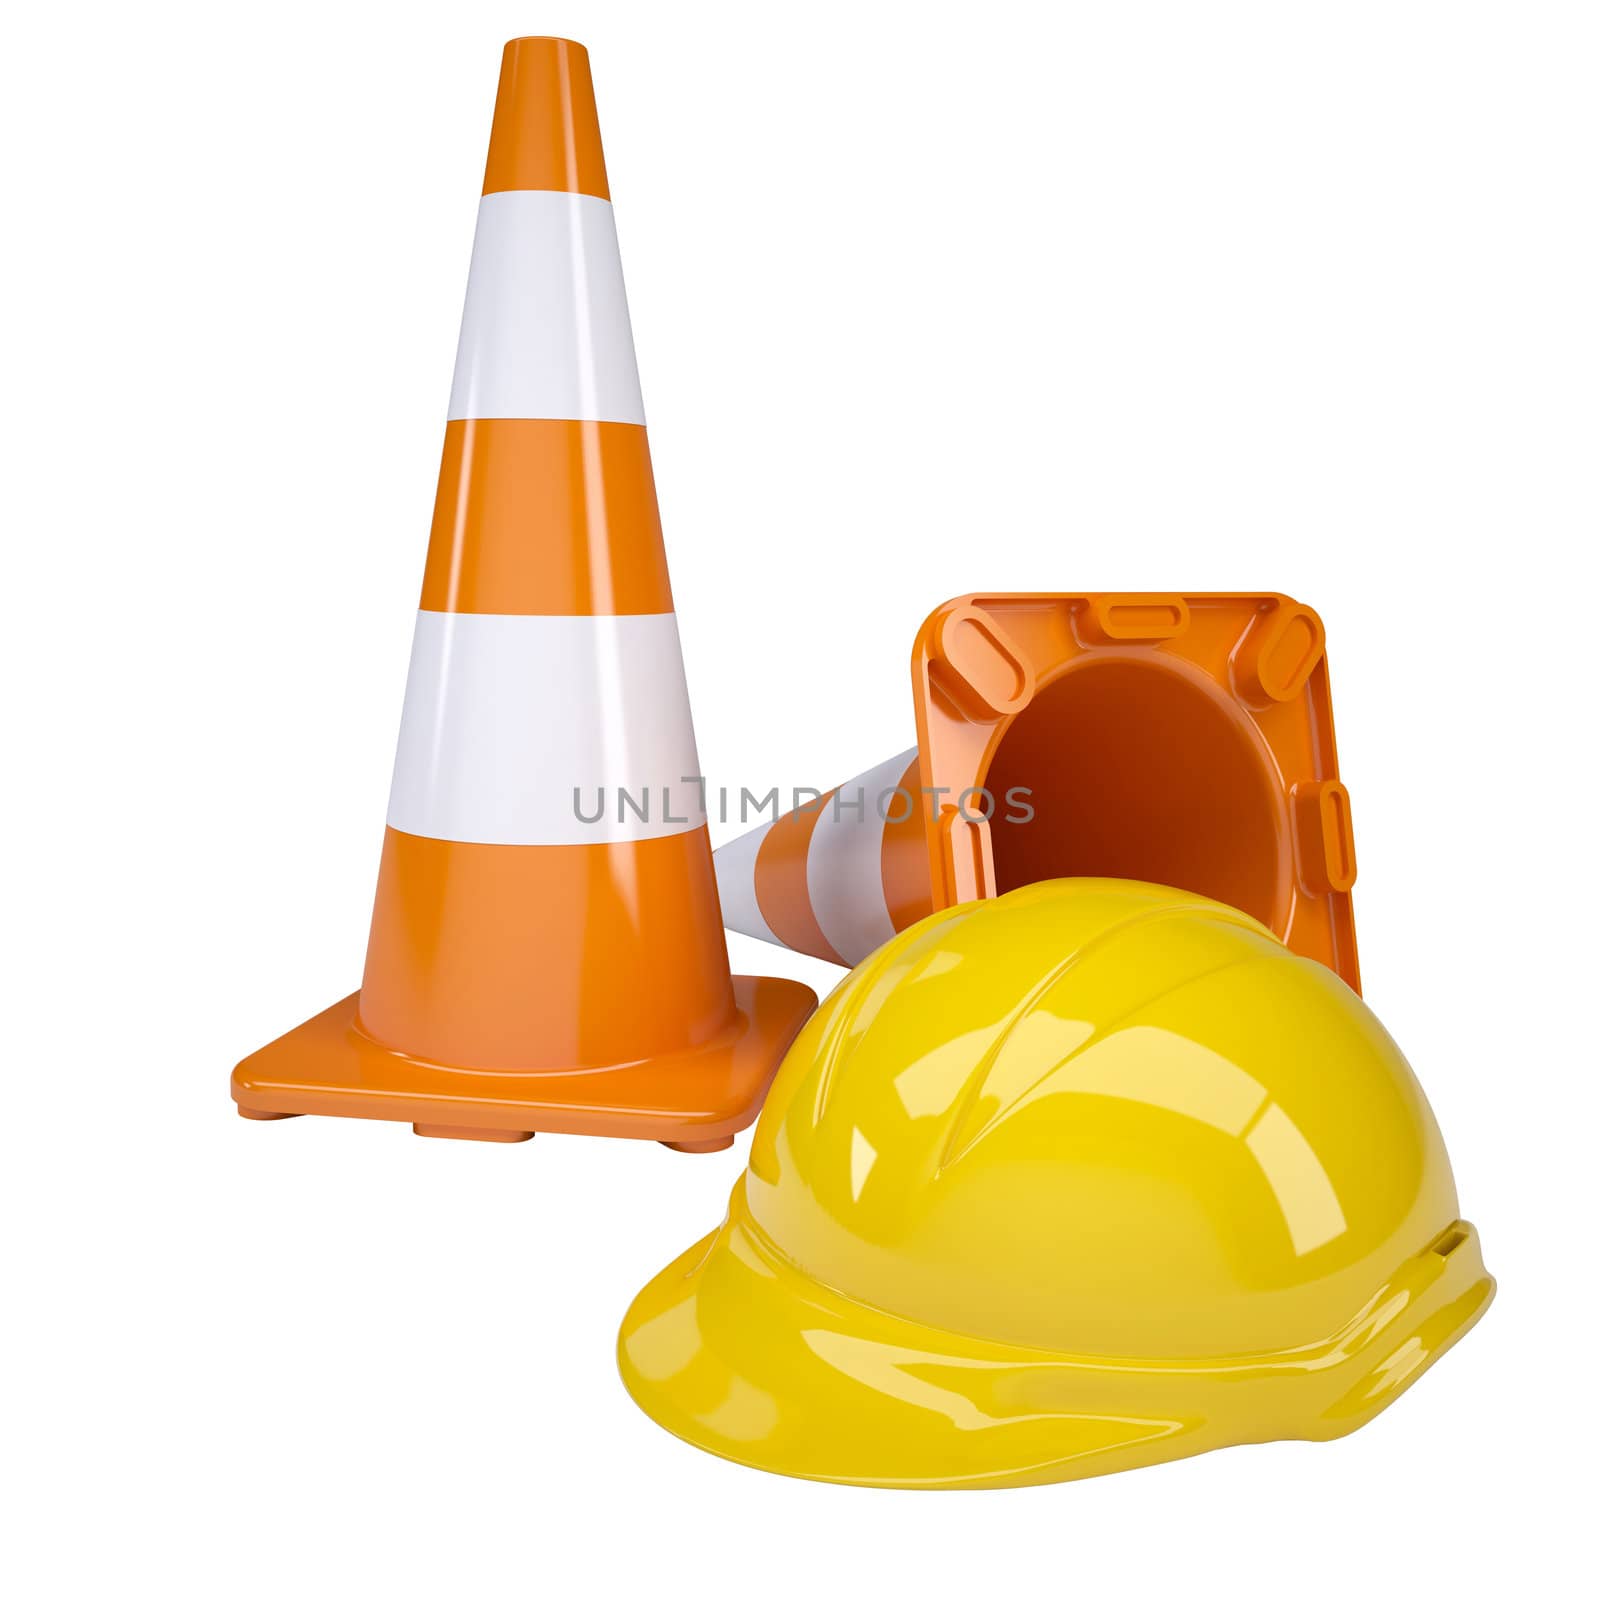 Traffic cone and helmet by cherezoff